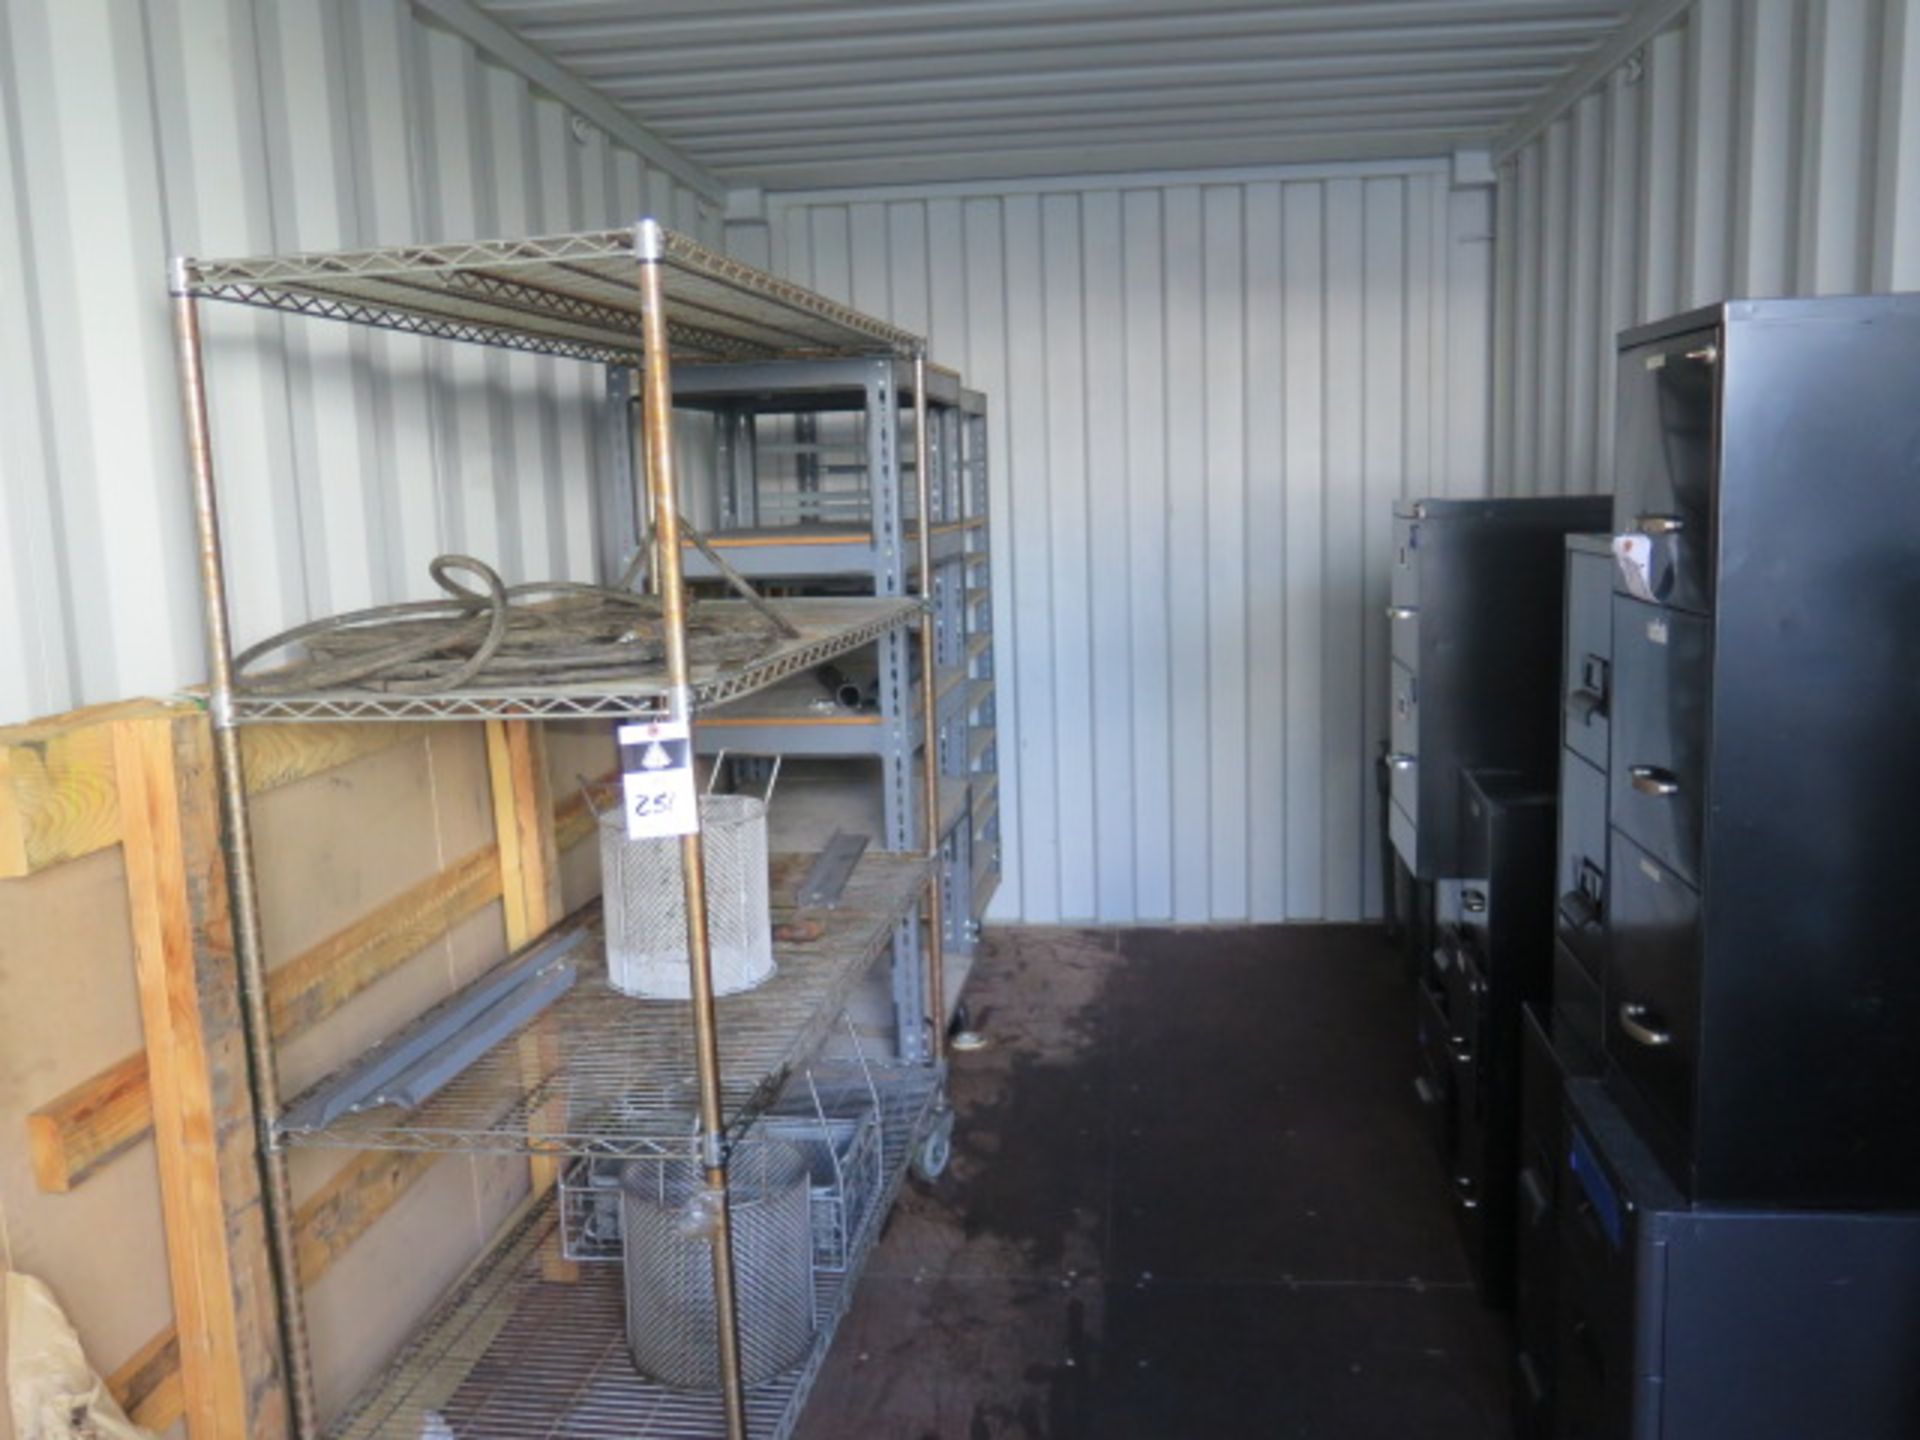 Contents of Container Shelves, File Cabinets and Carts (SOLD AS-IS - NO WARRANTY)